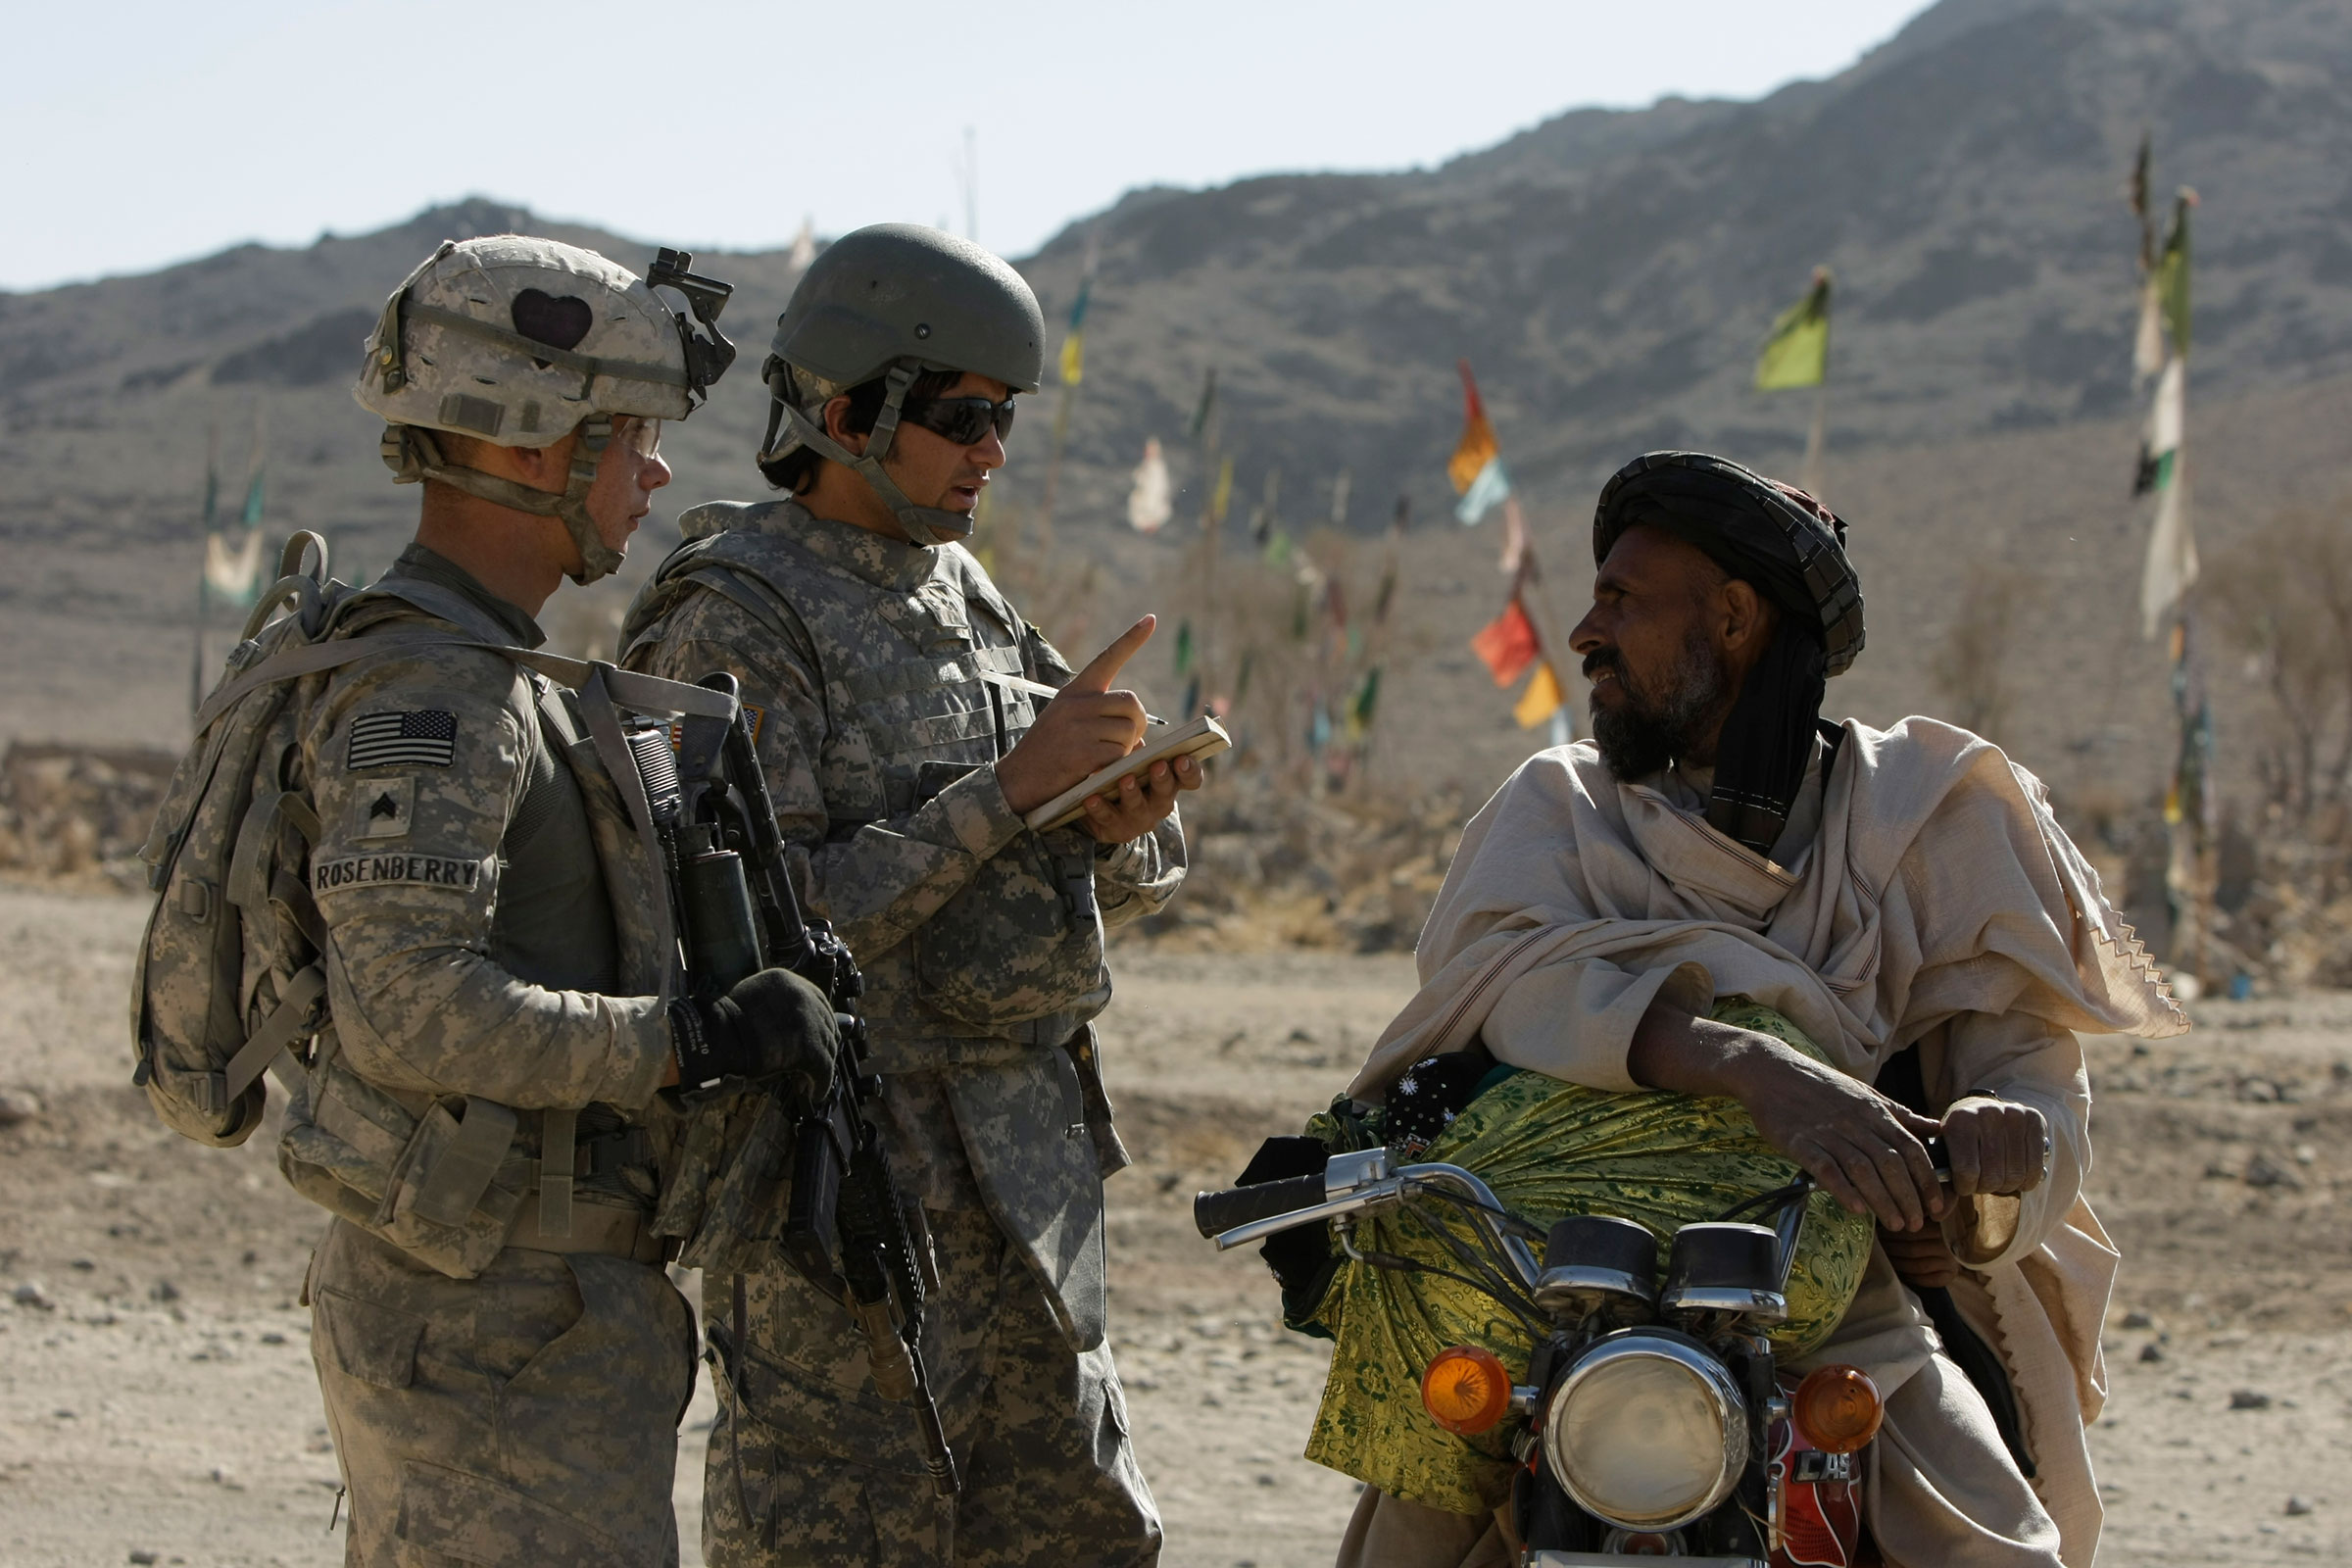 US Army Sgt. Skyler Rosenberry of Pennsylvania, left, and an Afghan interpreter, center, from First Battalion, 502nd Infantry Regiment, 101st Airborne Division speak to an Afghan man during a foot patrol in West Now Ruzi village, district Panjwai, Afghanistan's Kandahar province, Wednesday, Nov. 24, 2010. (Alexander Zemlianichenko—AP)